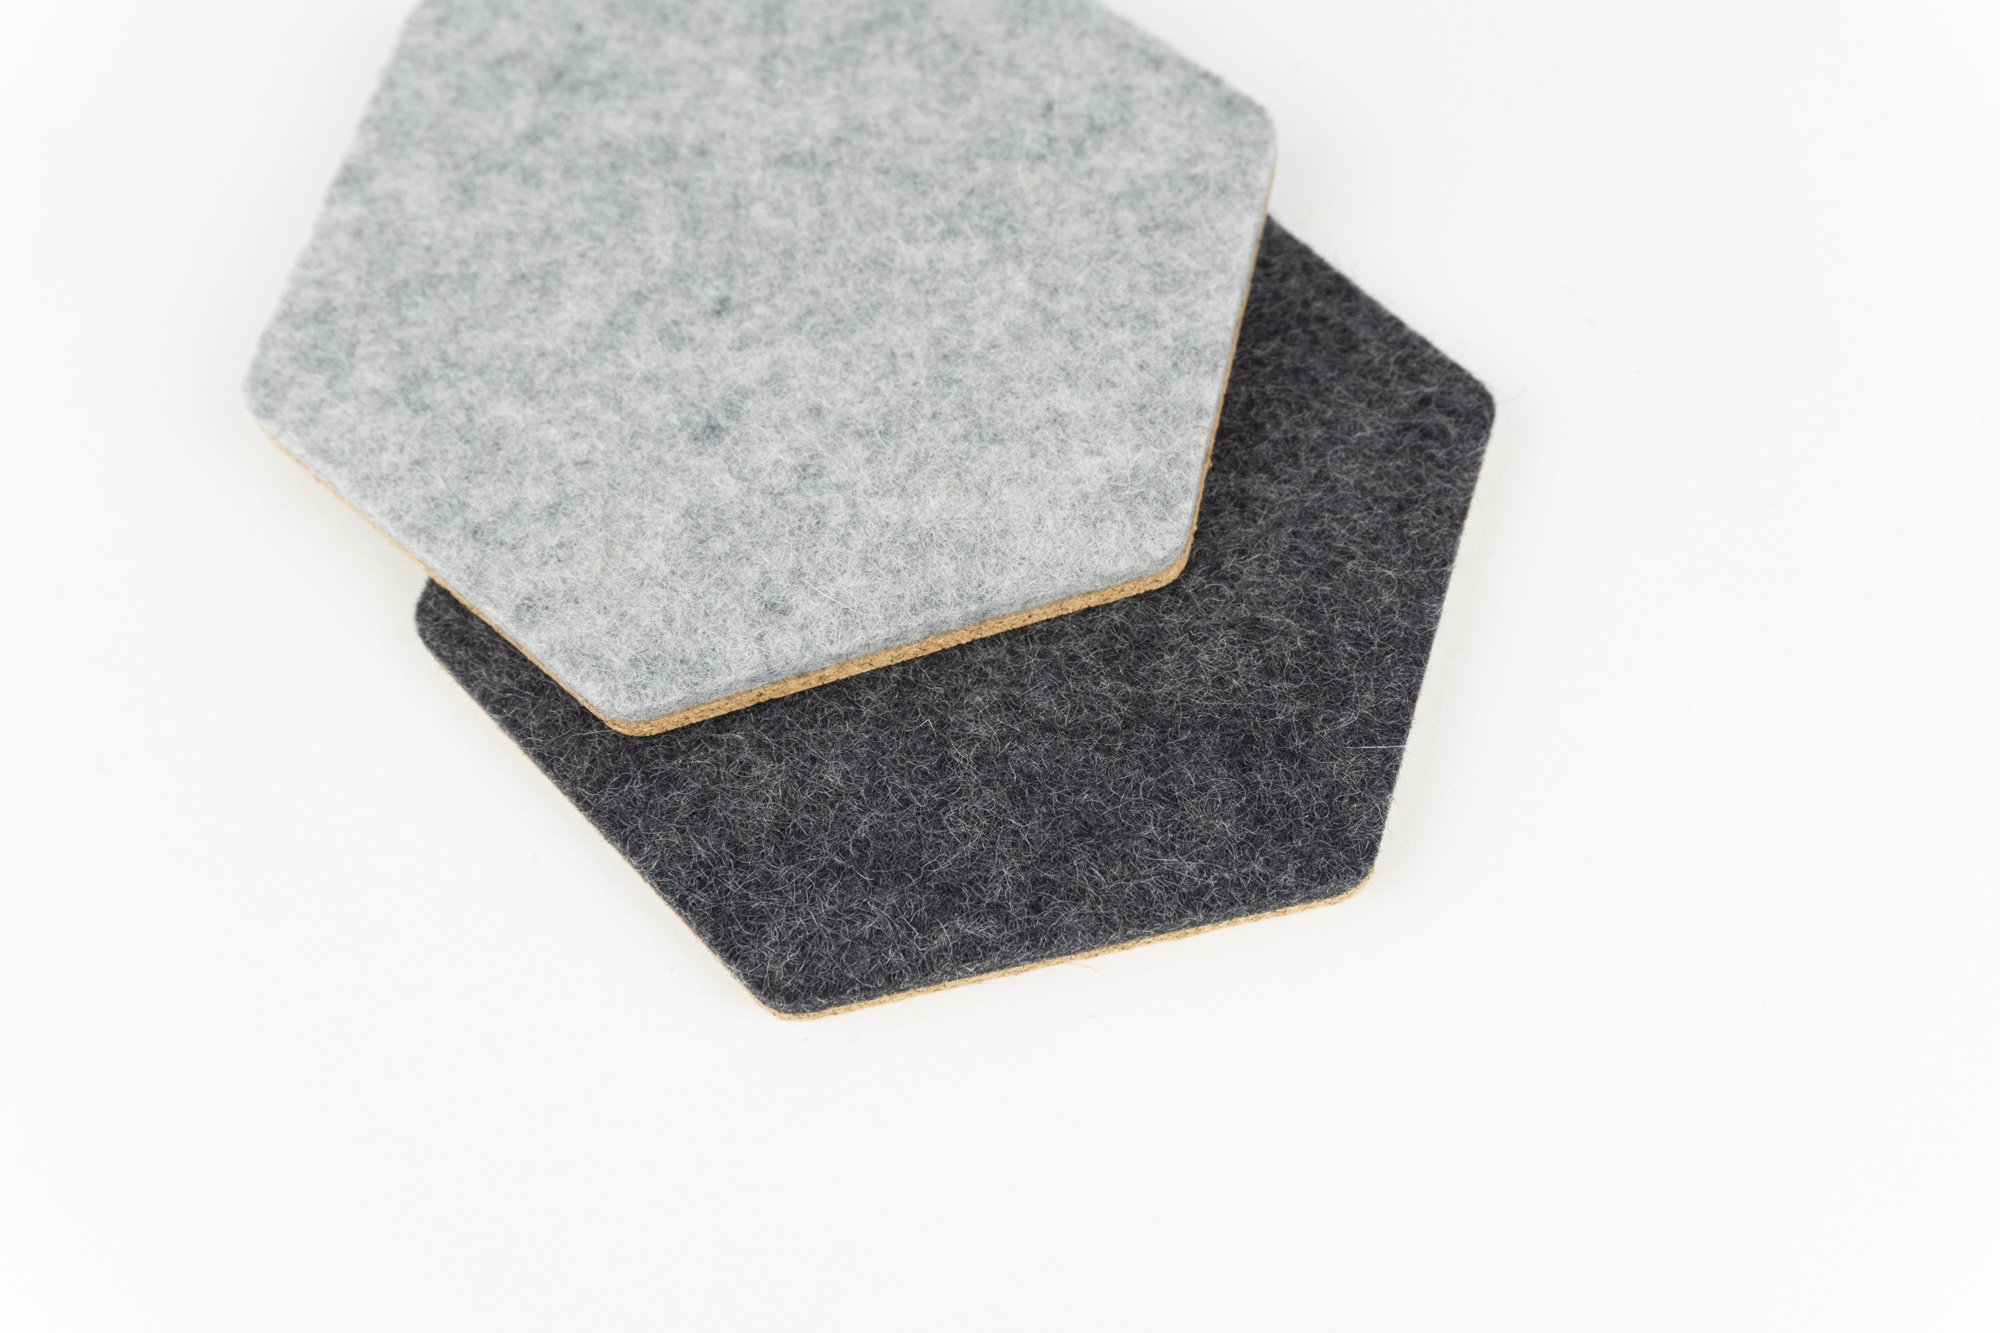 Colour comparison between our black and grey wool hexagonal coasters.